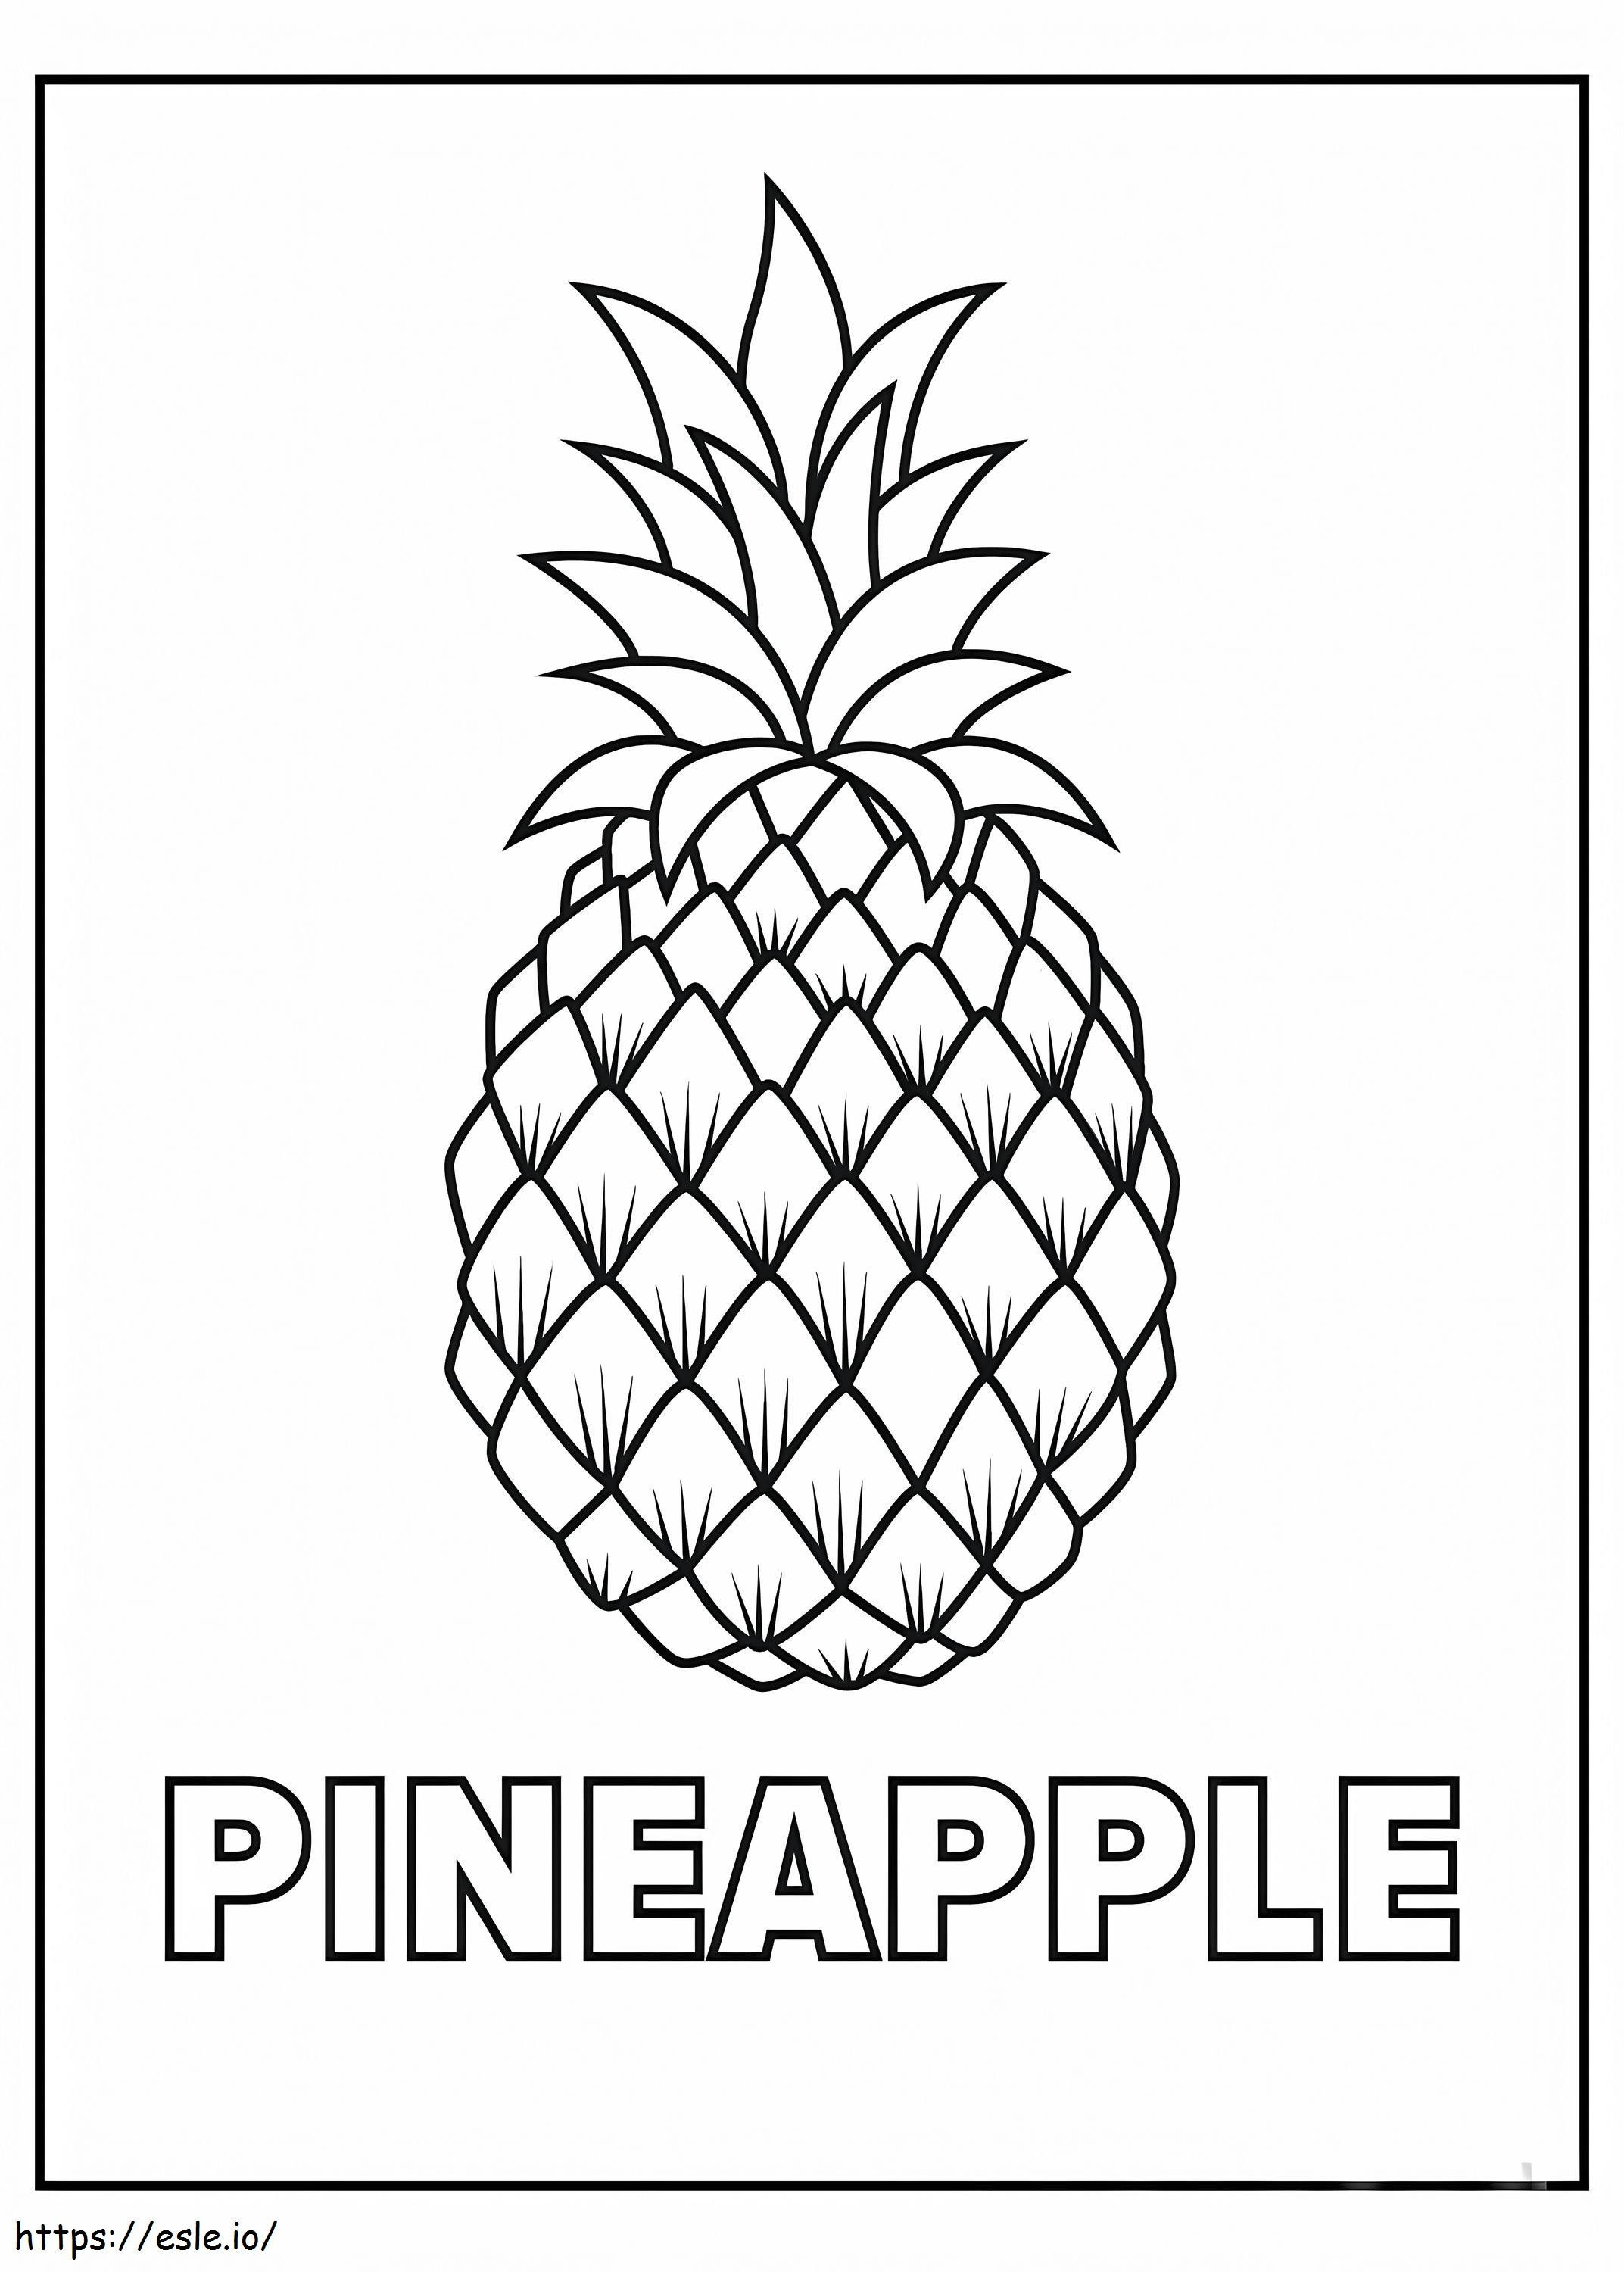 Printable Pineapple coloring page